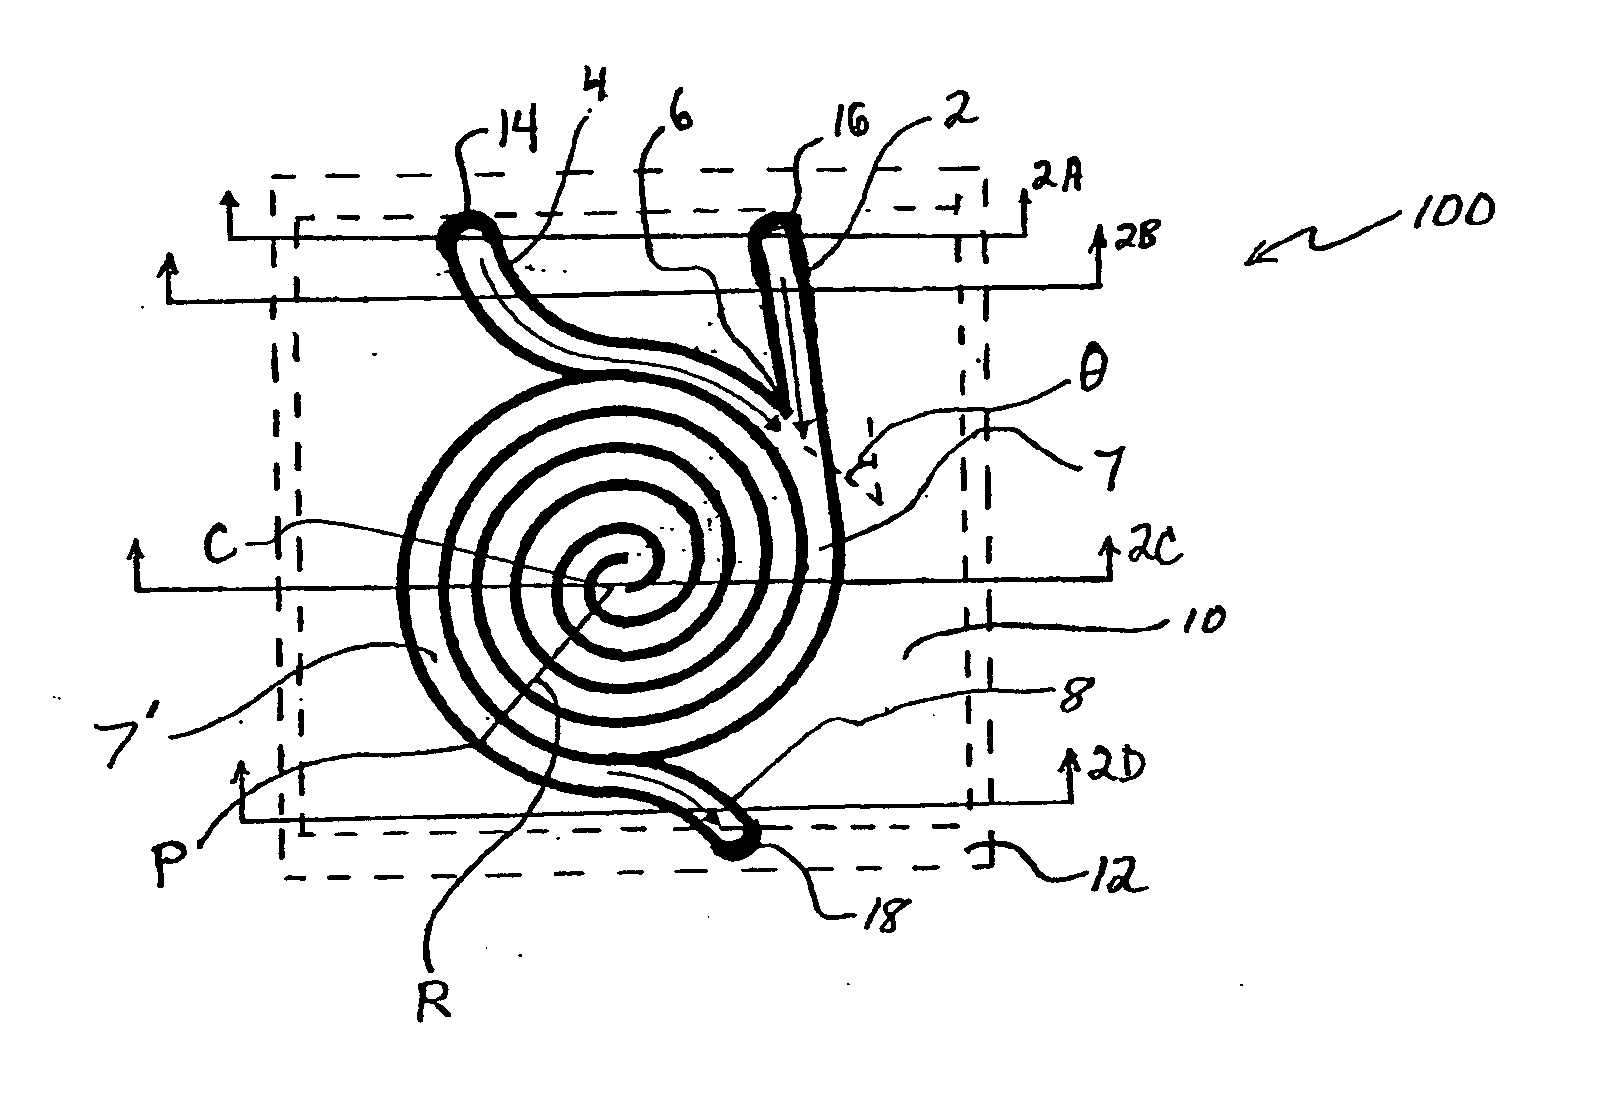 Micromixer apparatus and methods of using same